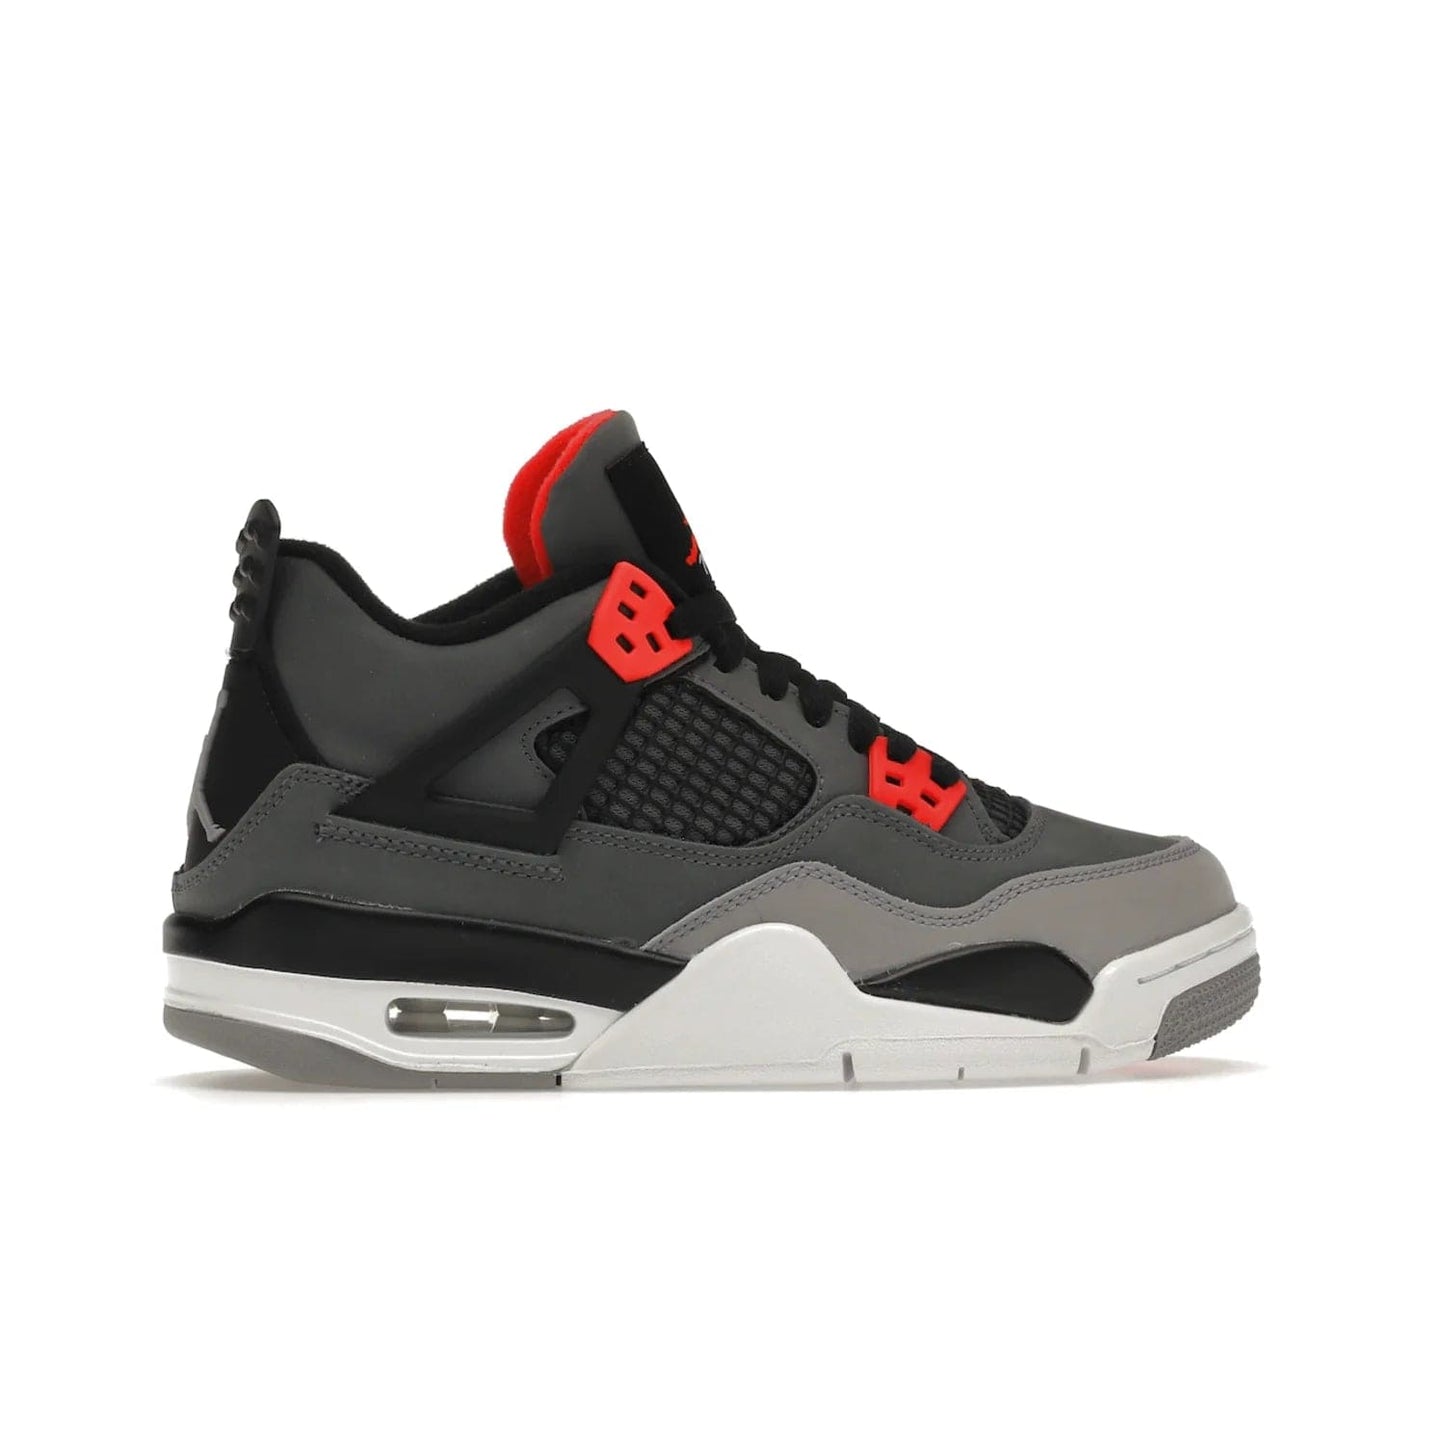 Jordan 4 Retro Infrared (GS) - Image 36 - Only at www.BallersClubKickz.com - Shop the Air Jordan 4 Retro Infrared (GS) for a classic silhouette with subtle yet bold features. Dark grey nubuck upper with lighter forefoot overlay, black accents, Infrared molded eyelets & woven tongue tag. Available June 2022.